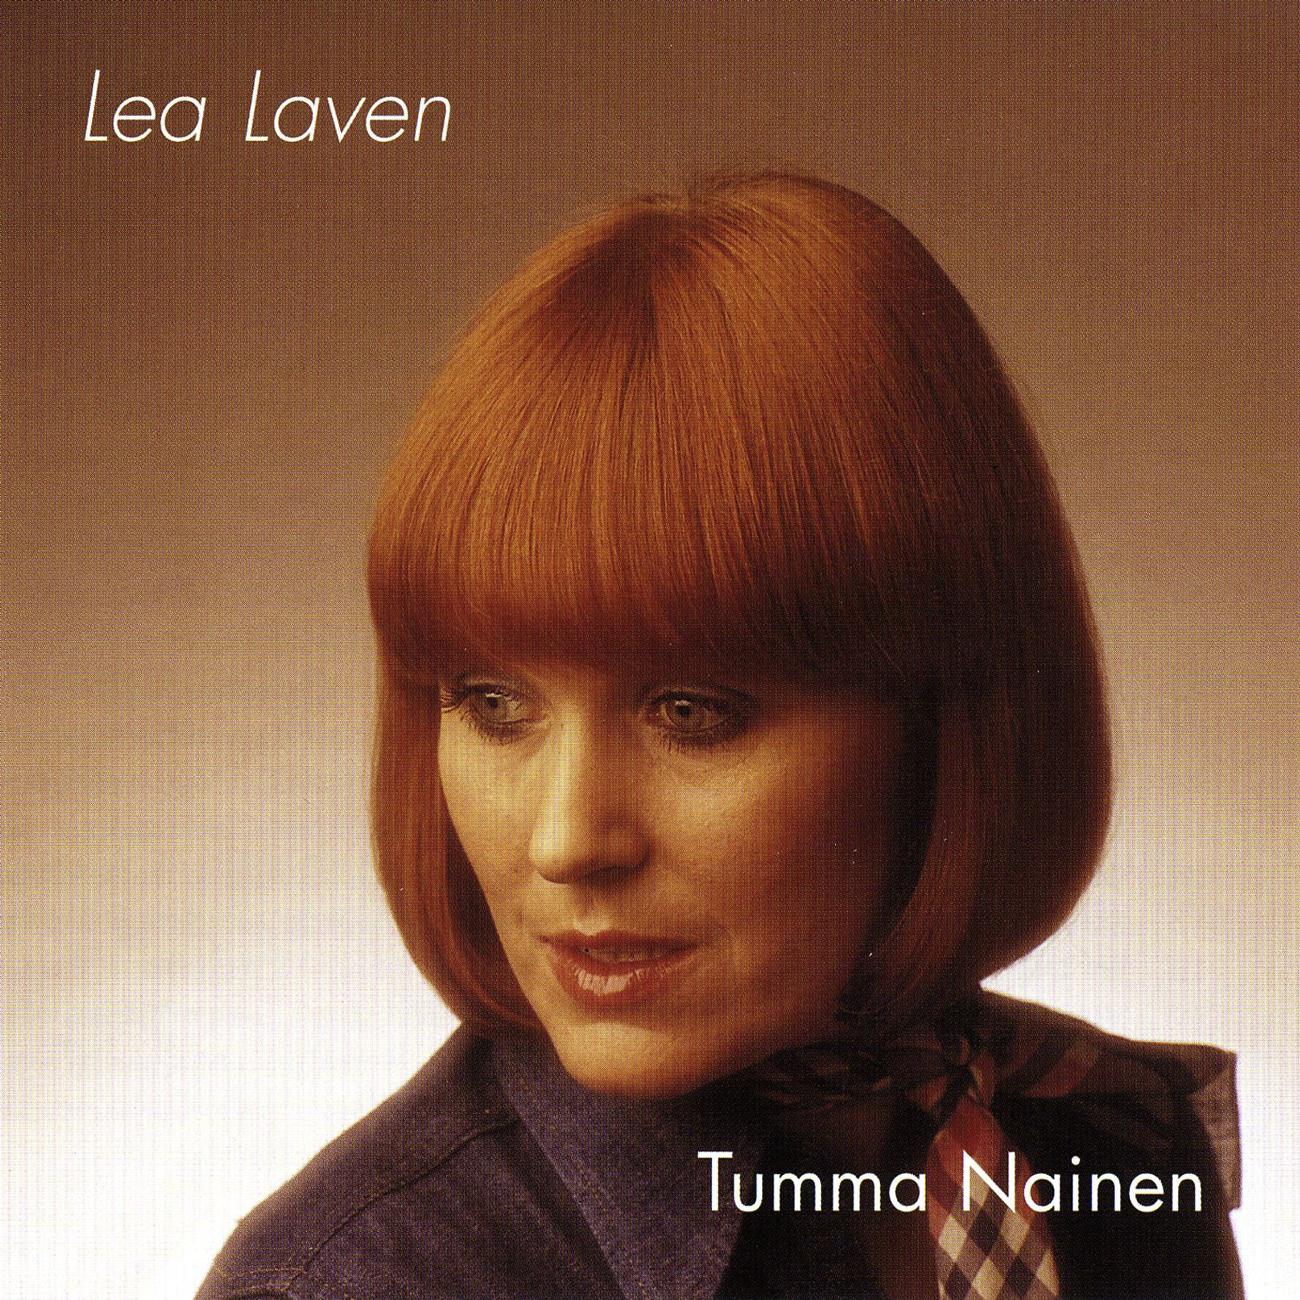 Lea Laven - USKON IHMISEEN(PUT YOUR HAND IN THE HAND)